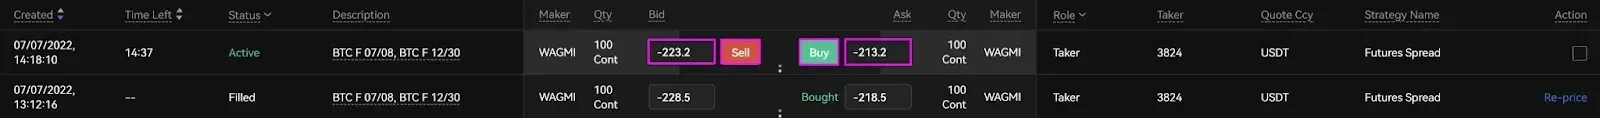 Futures spread - Buy or sell